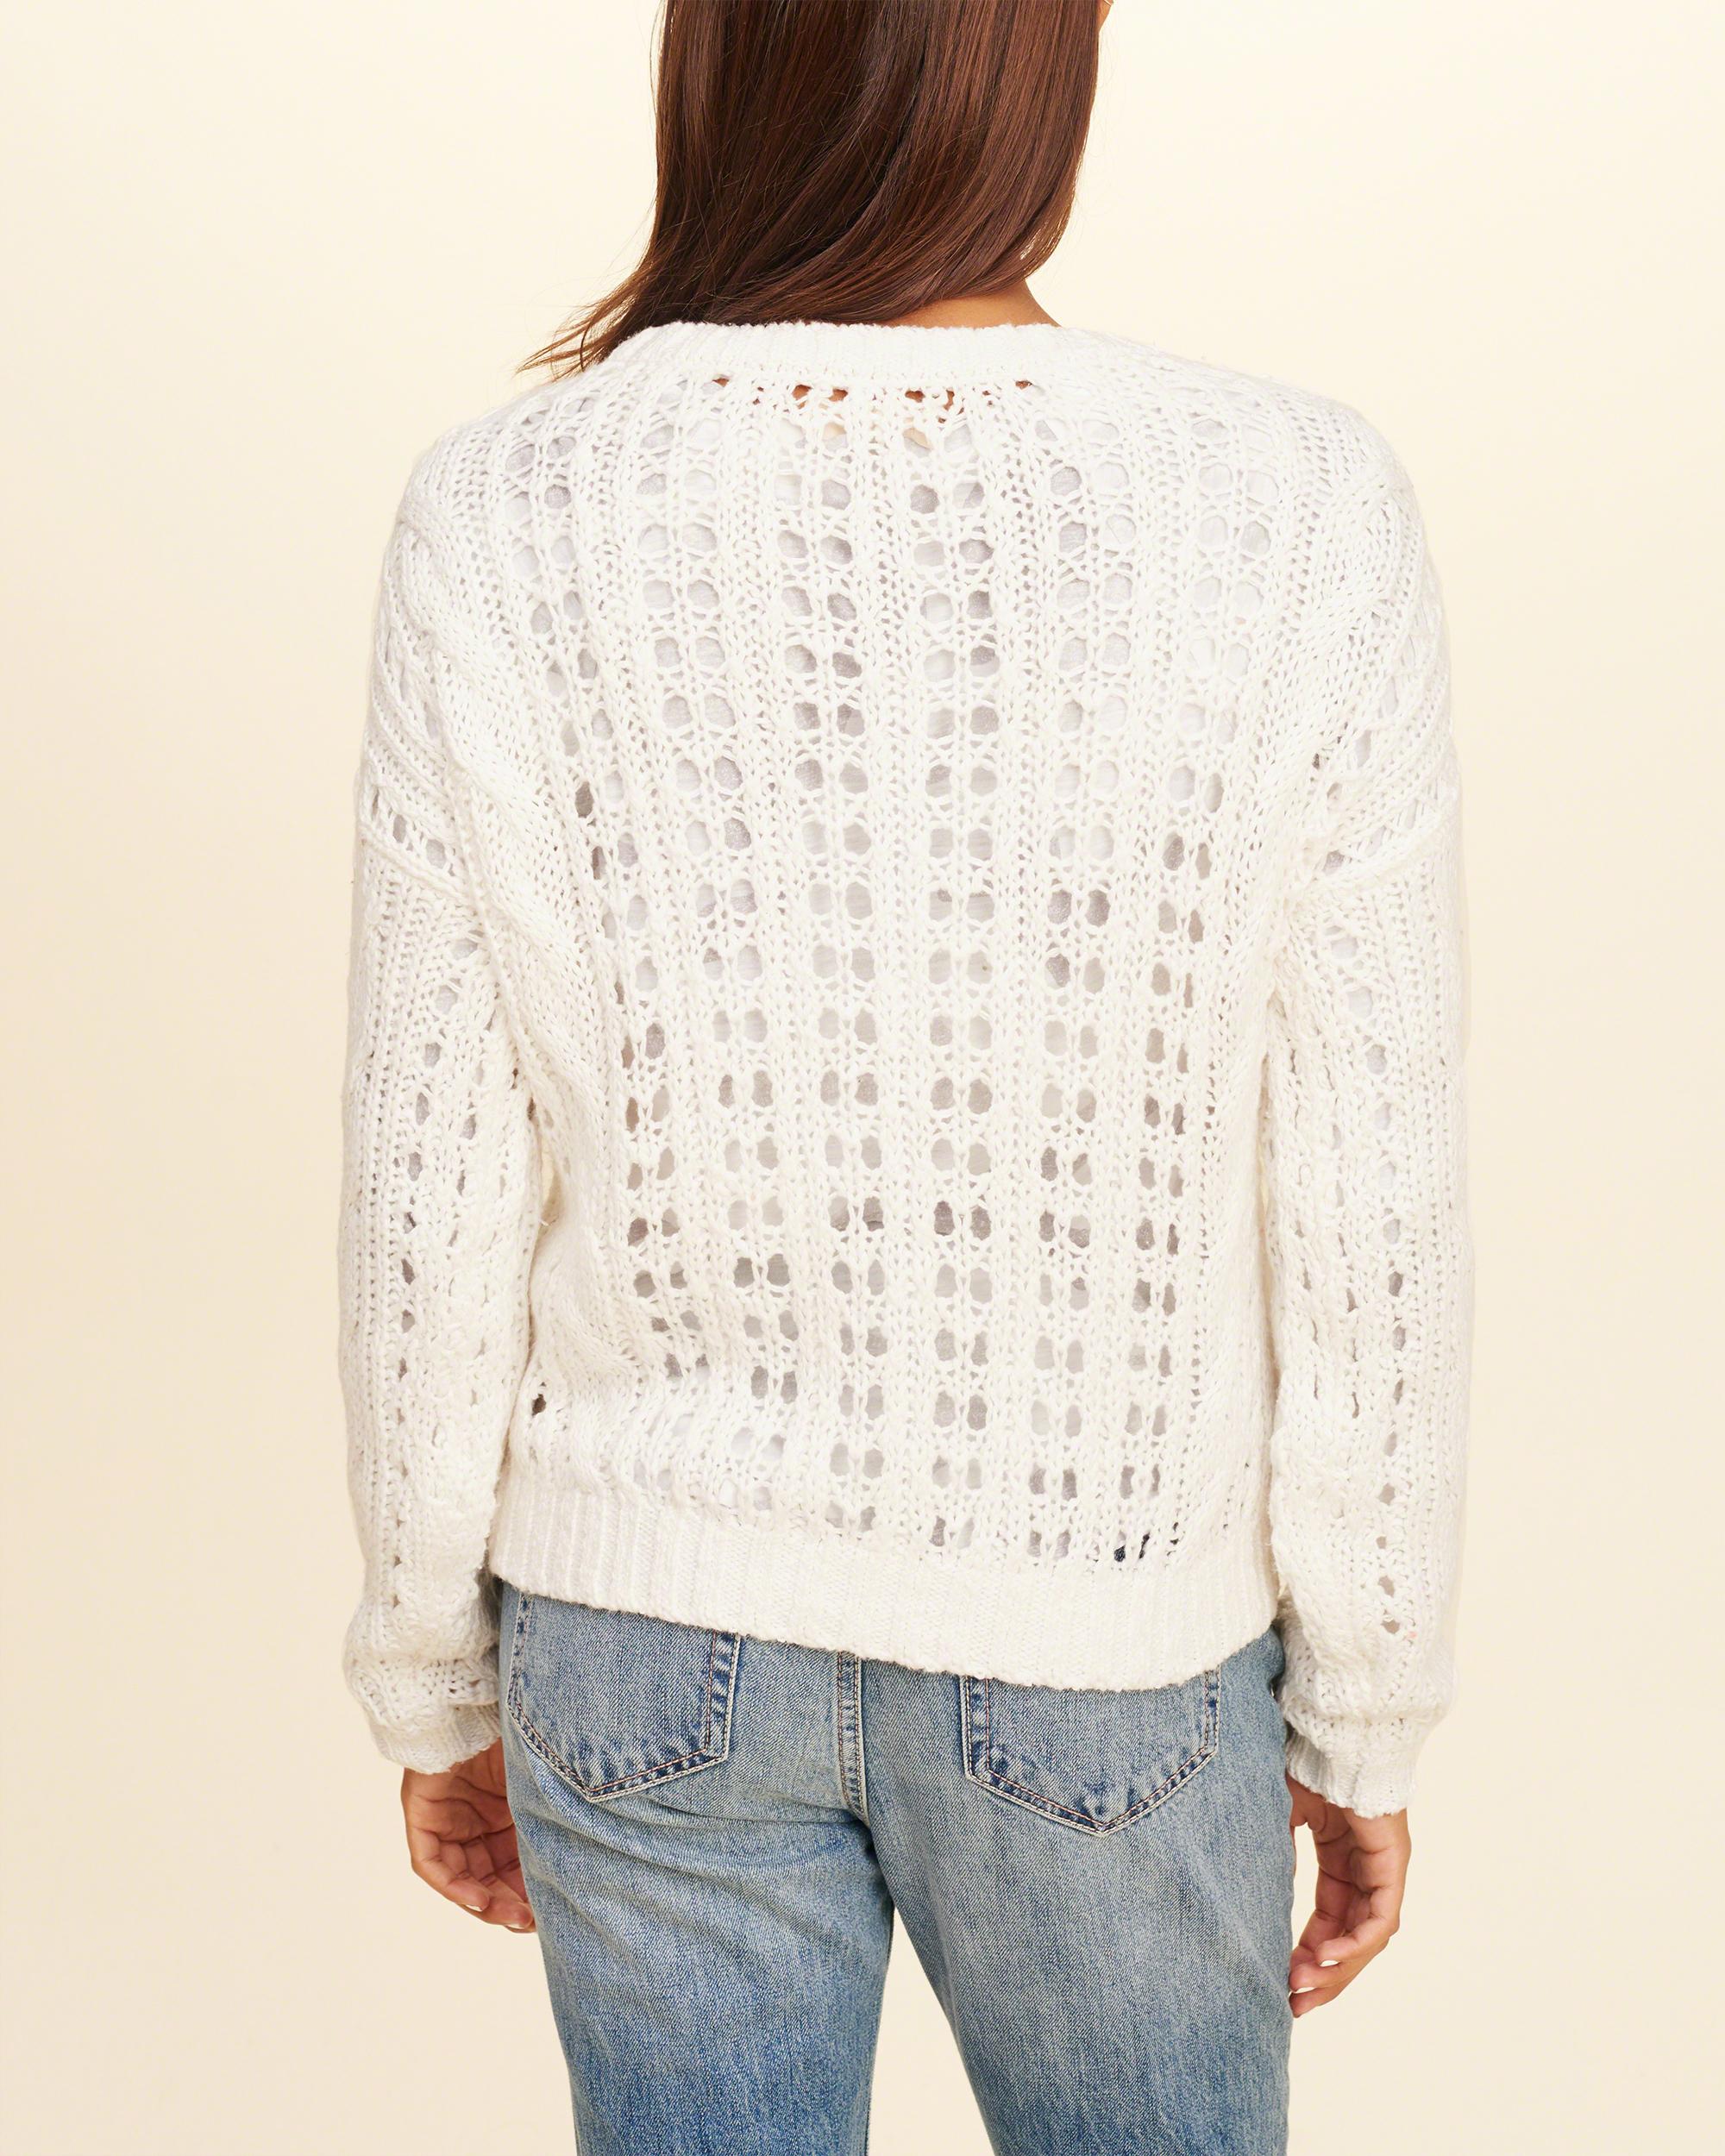 Lyst - Hollister Open Stitch Cable Sweater in White